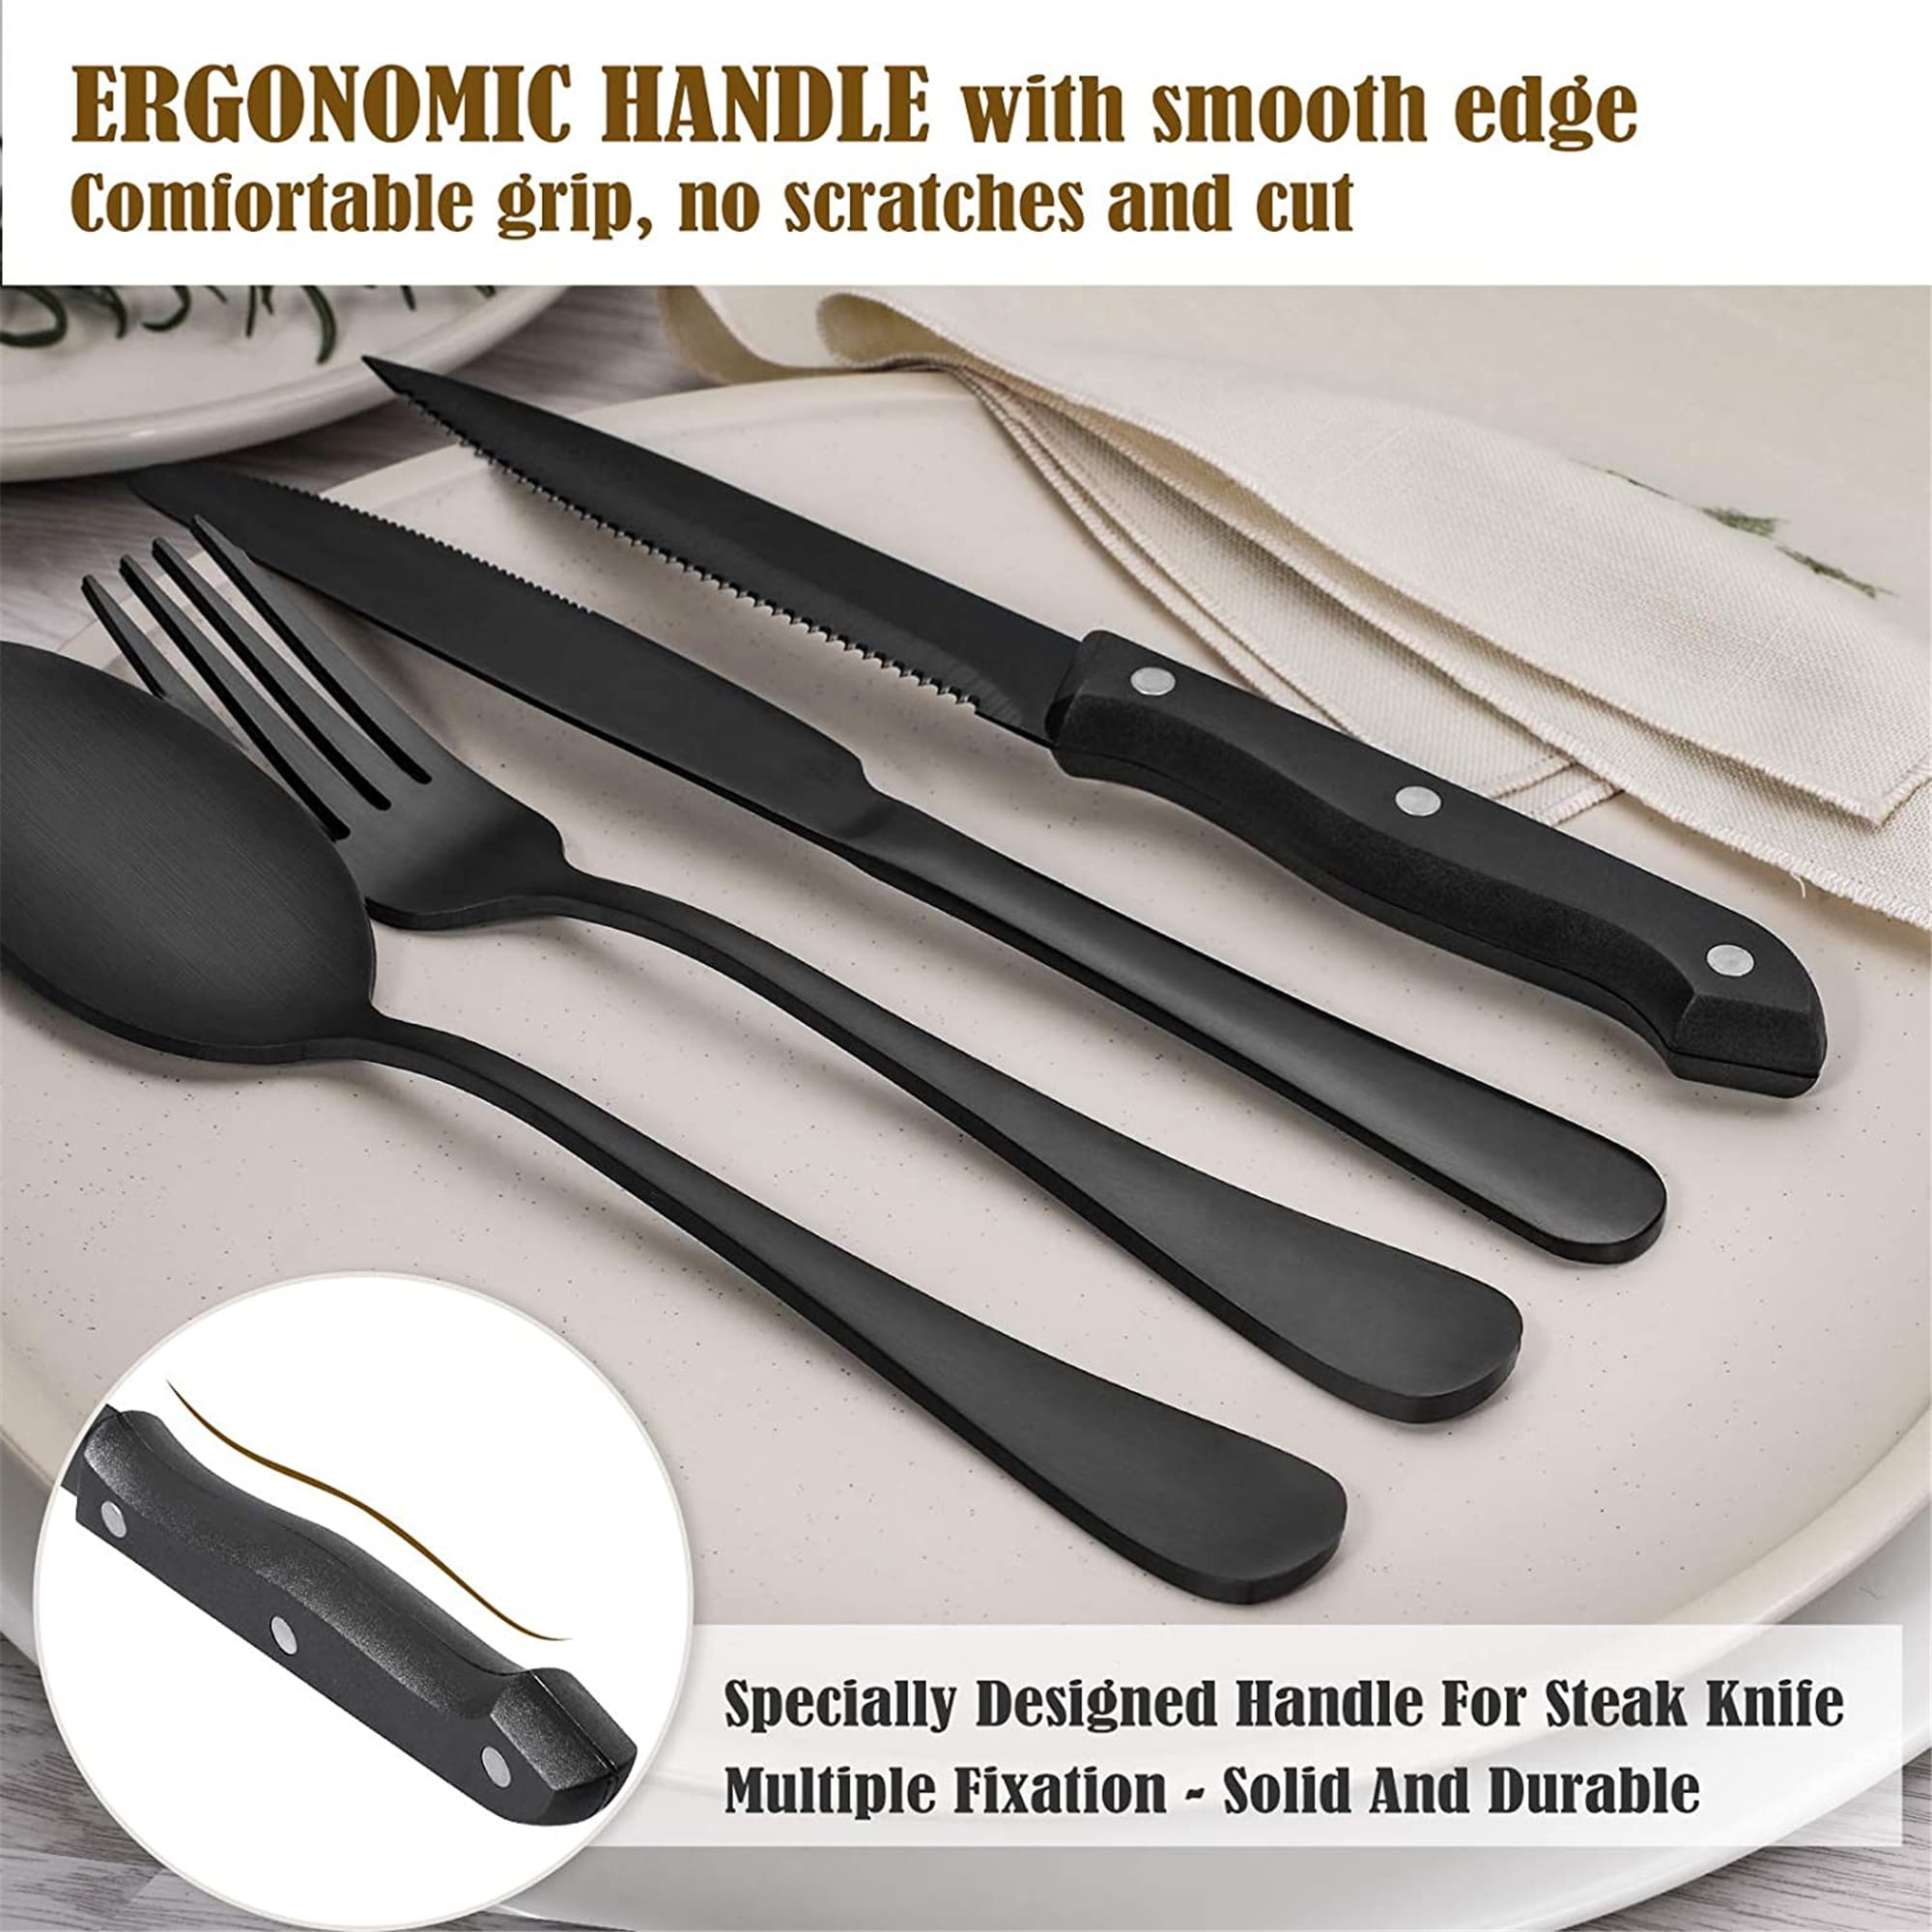 Hiware 24 Pieces Matte Black Silverware Set with Steak Knives for 4,  Stainless Steel Flatware Utensils Set, Hand Wash Recommended